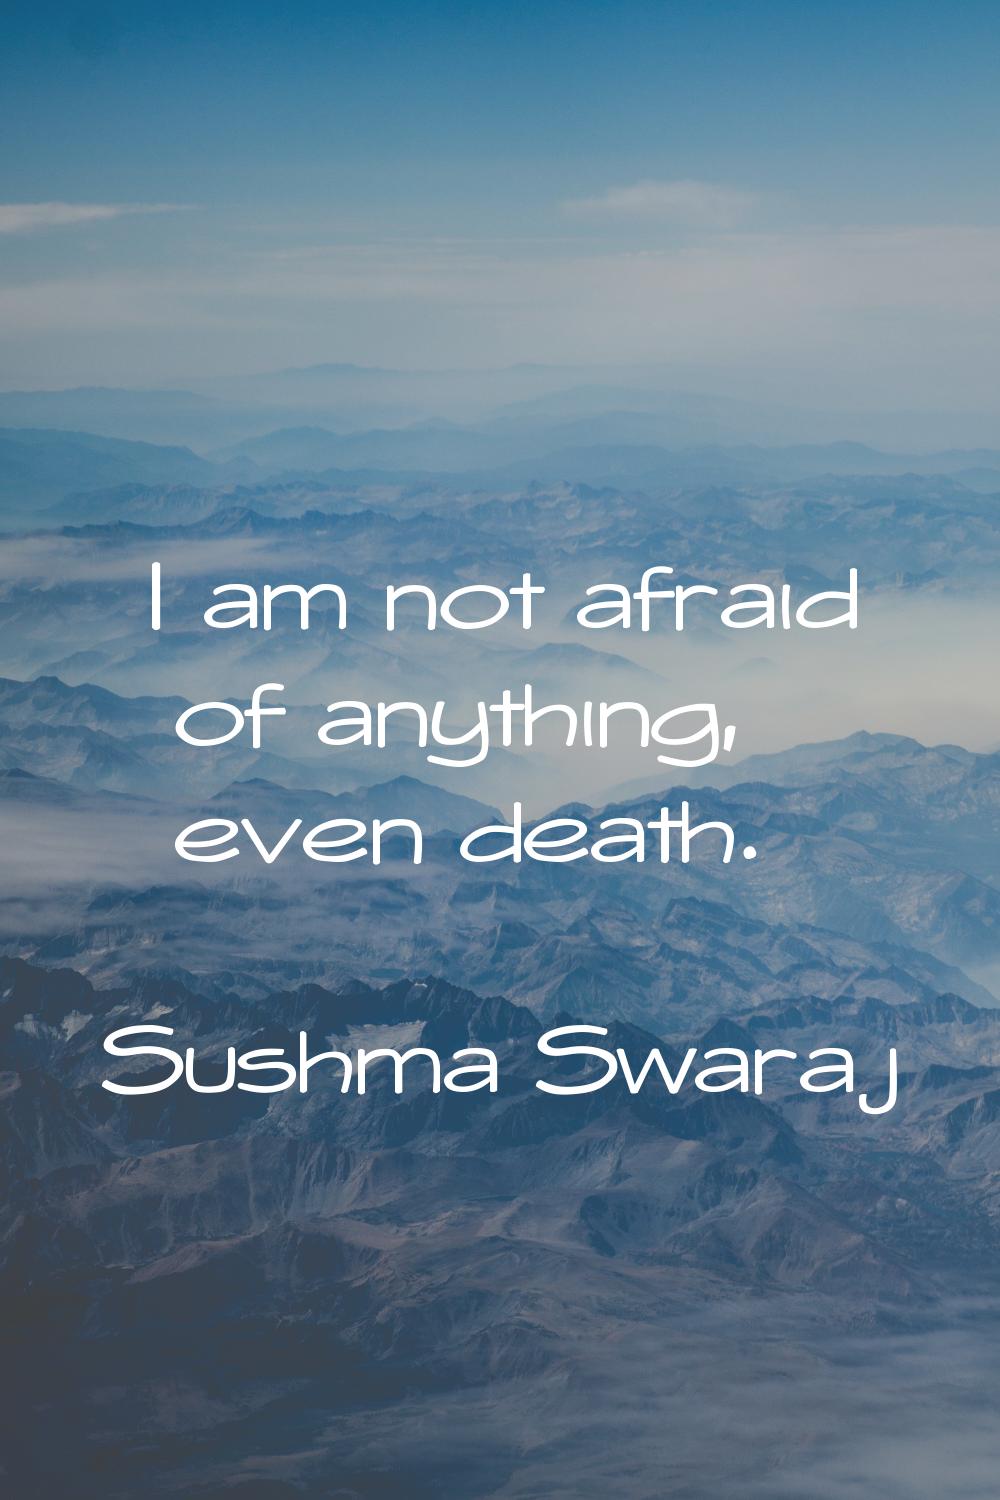 I am not afraid of anything, even death.